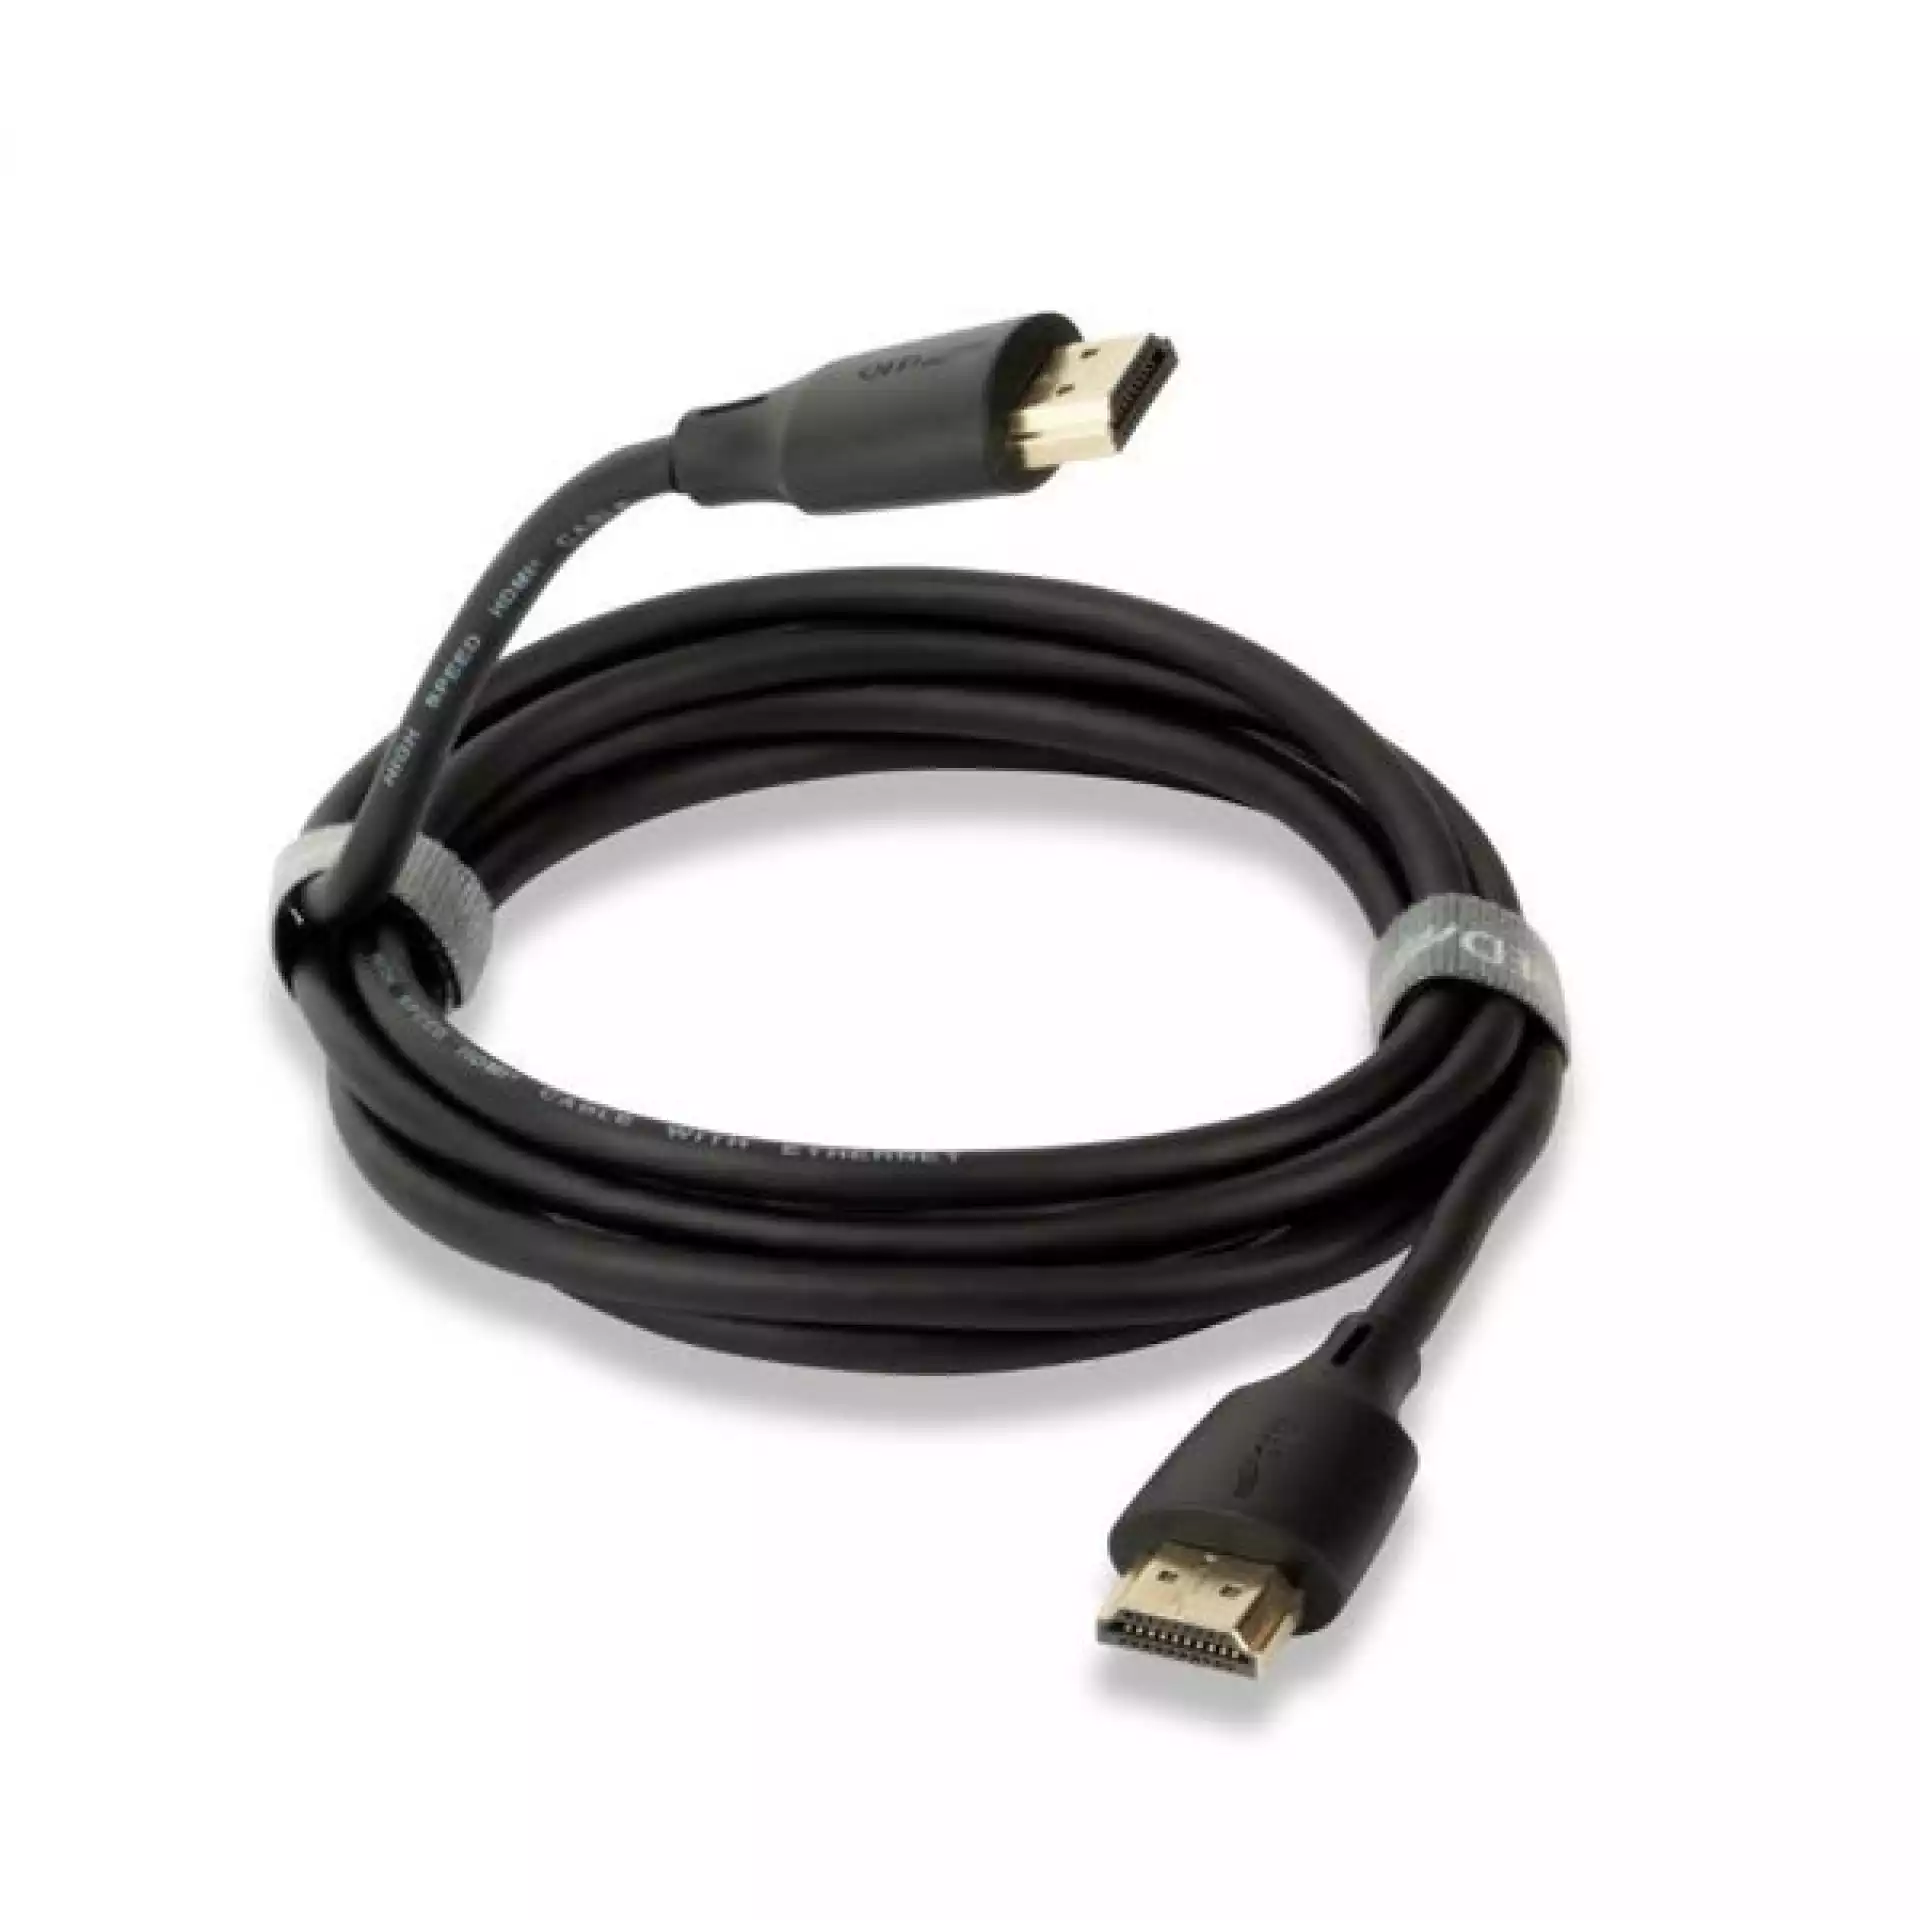 QED CONNECT HDMI 3m